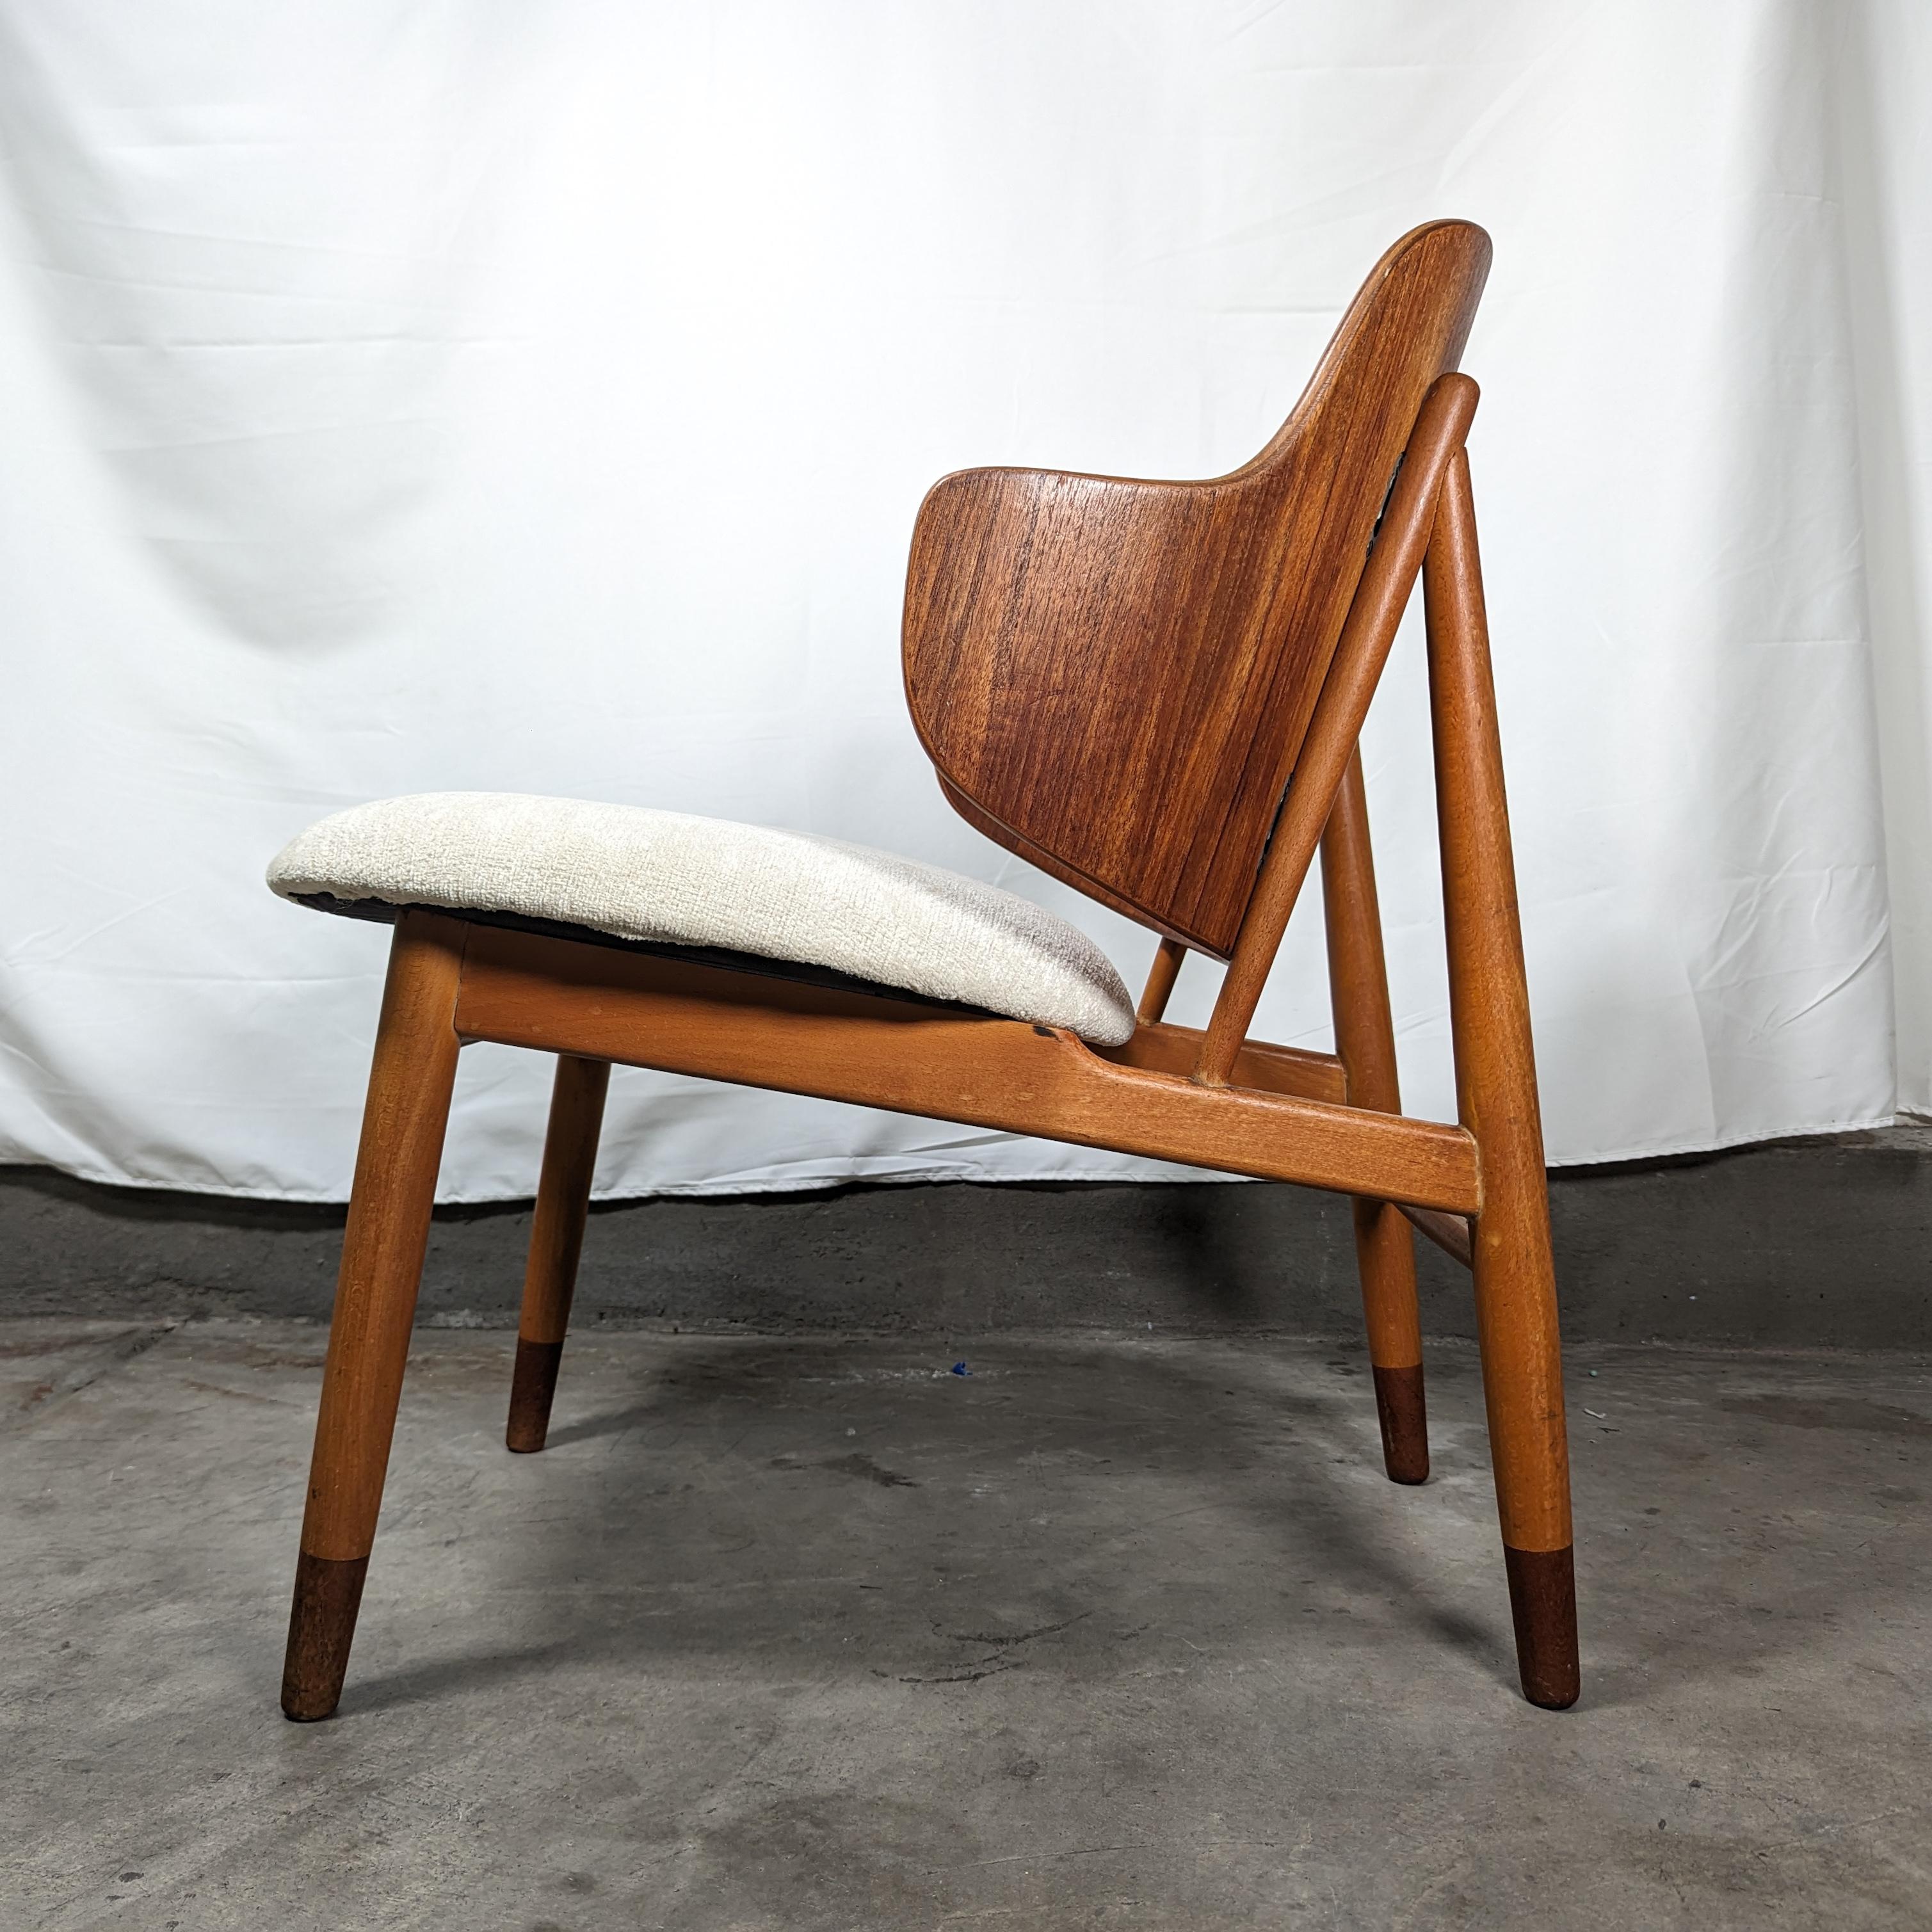 Step back in time with this magnificent vintage mid-century modern Penguin chair, a true gem of 1960s Danish design. Crafted by the renowned designer Ib Kofod-Larsen, this striking piece showcases the perfect blend of function and style.

The chair